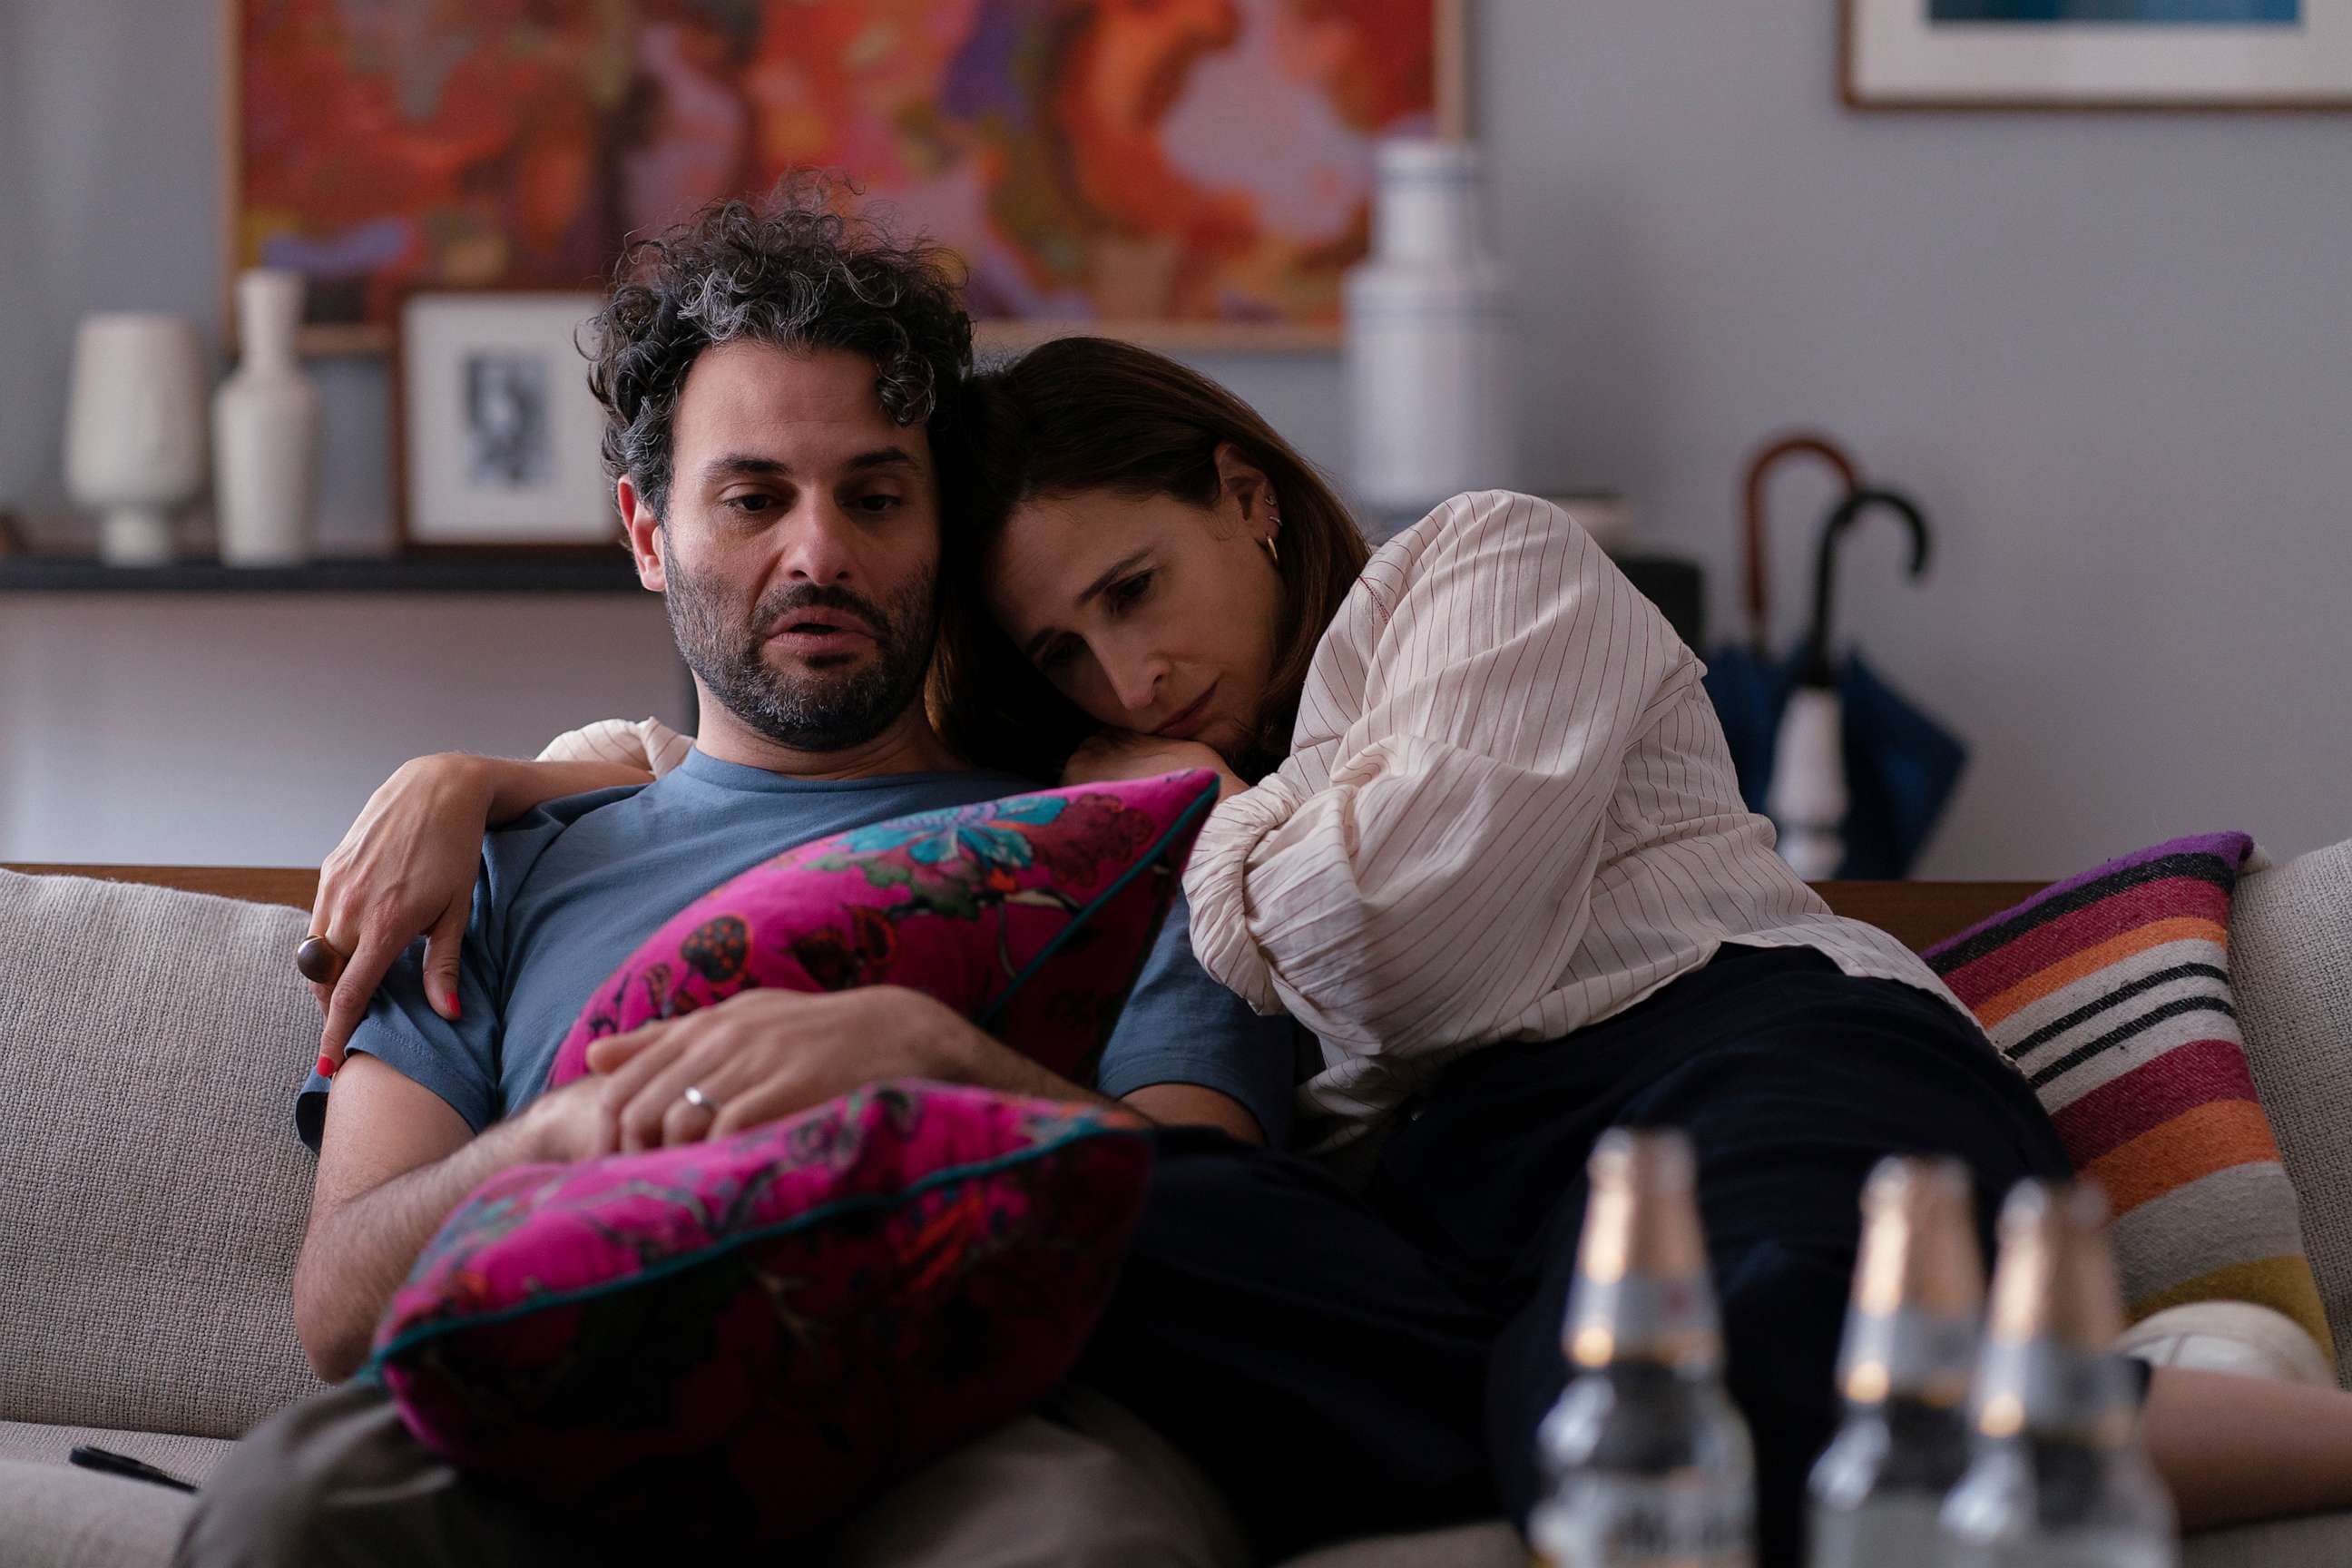 PHOTO: Arian Moayed, left, and Michaela Watkins in a scene from "You Hurt My Feelings."